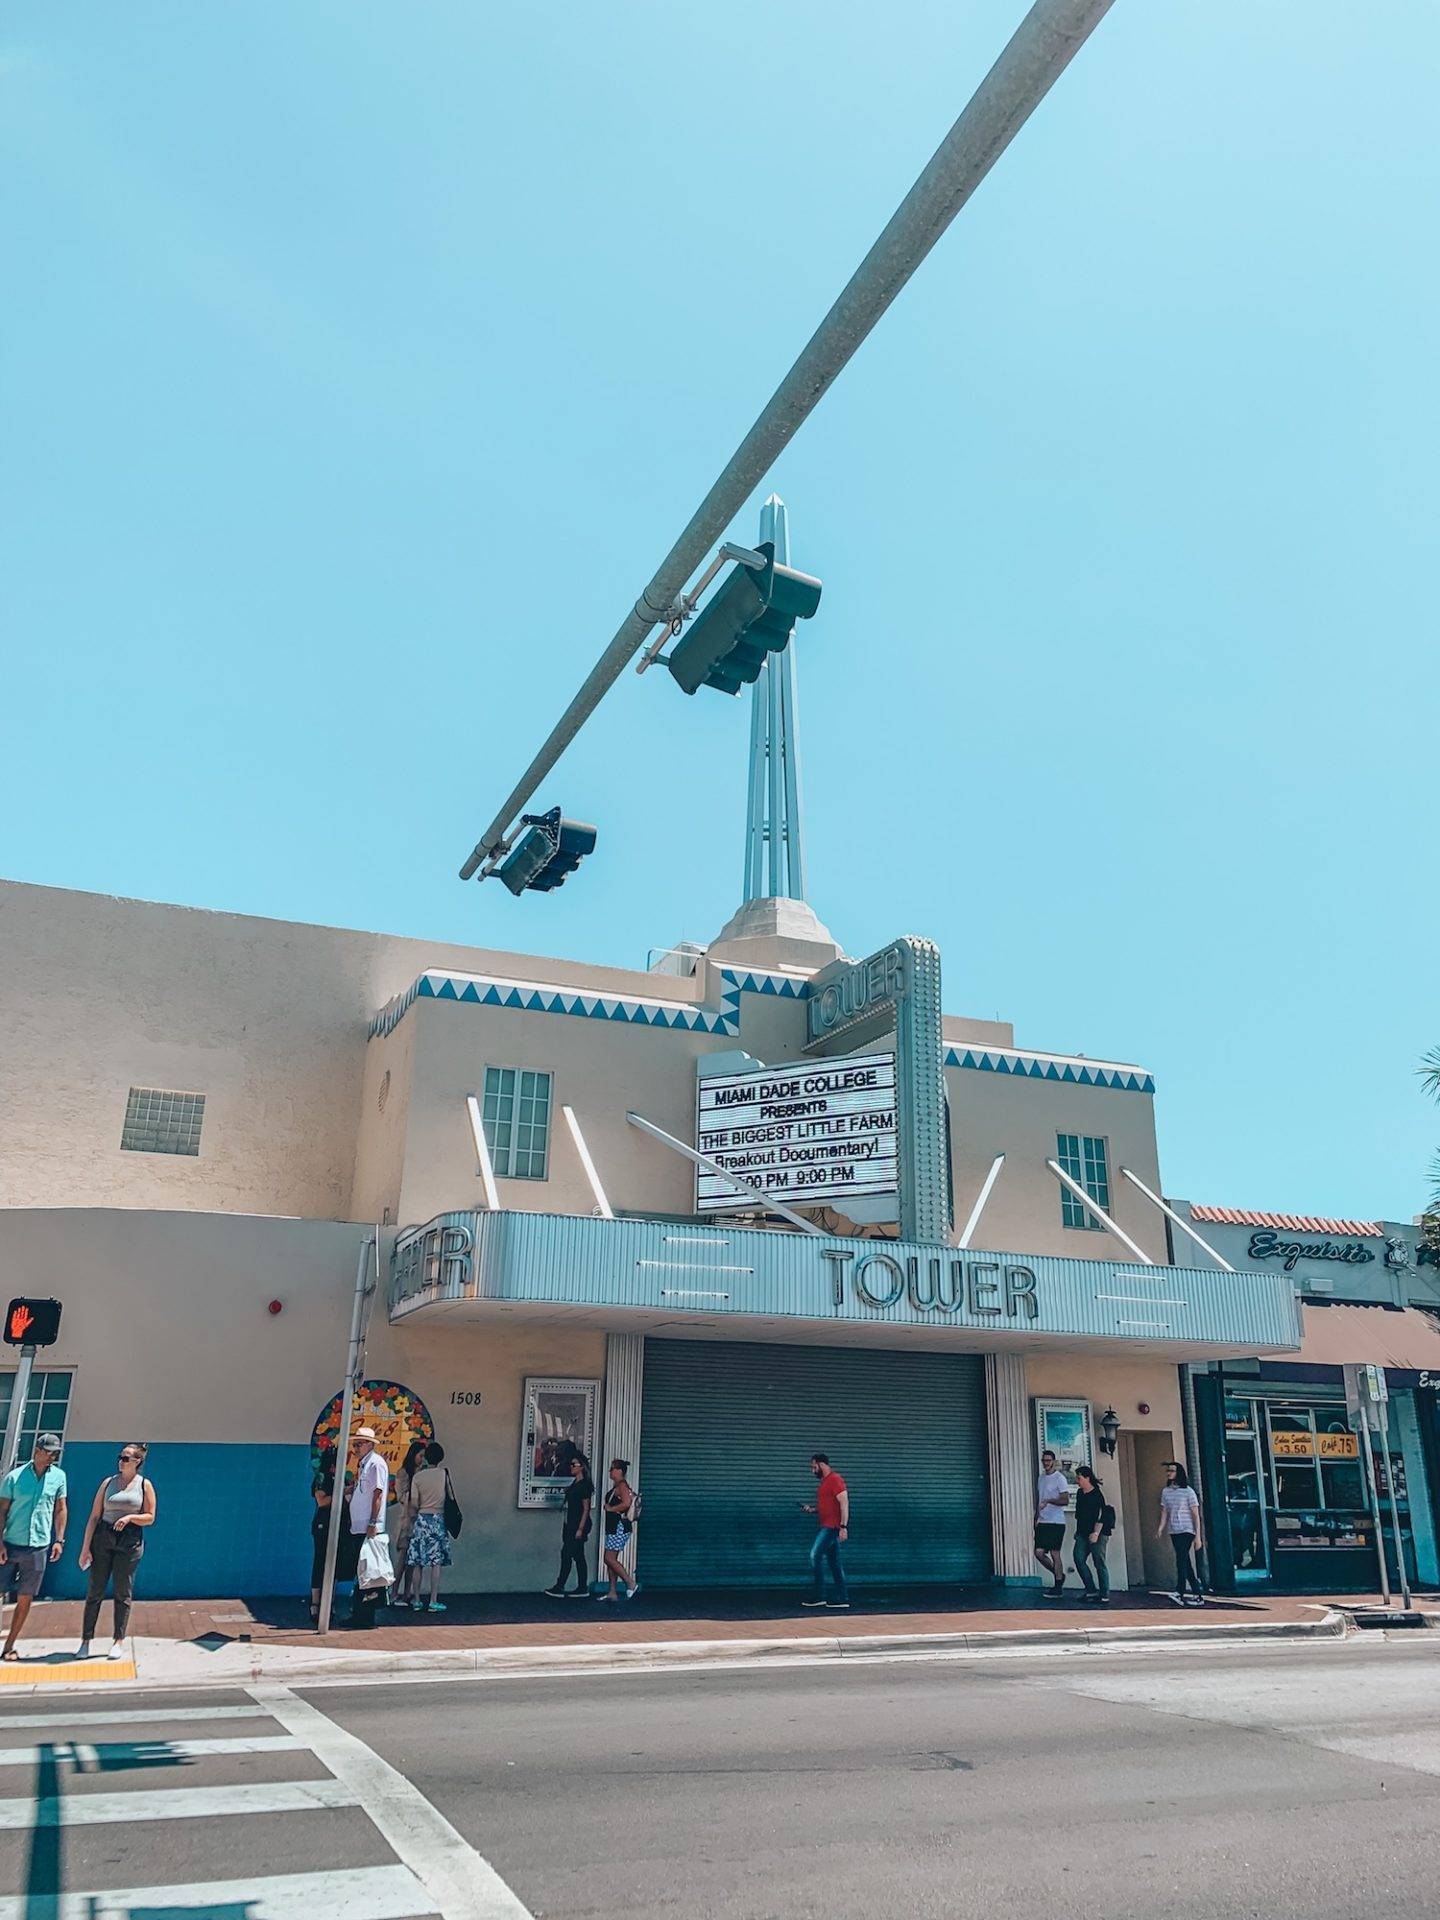 How to spend 1 perfect day in Little Havana, Miami. A complete guide on what to see and do, which restaurants to dine at, bars to visit, Cuban treats to try and more. If you're headed to Little Havana for the day you'll definitely want to read this guide! Pictured here: Little Havana's iconic tower theatre